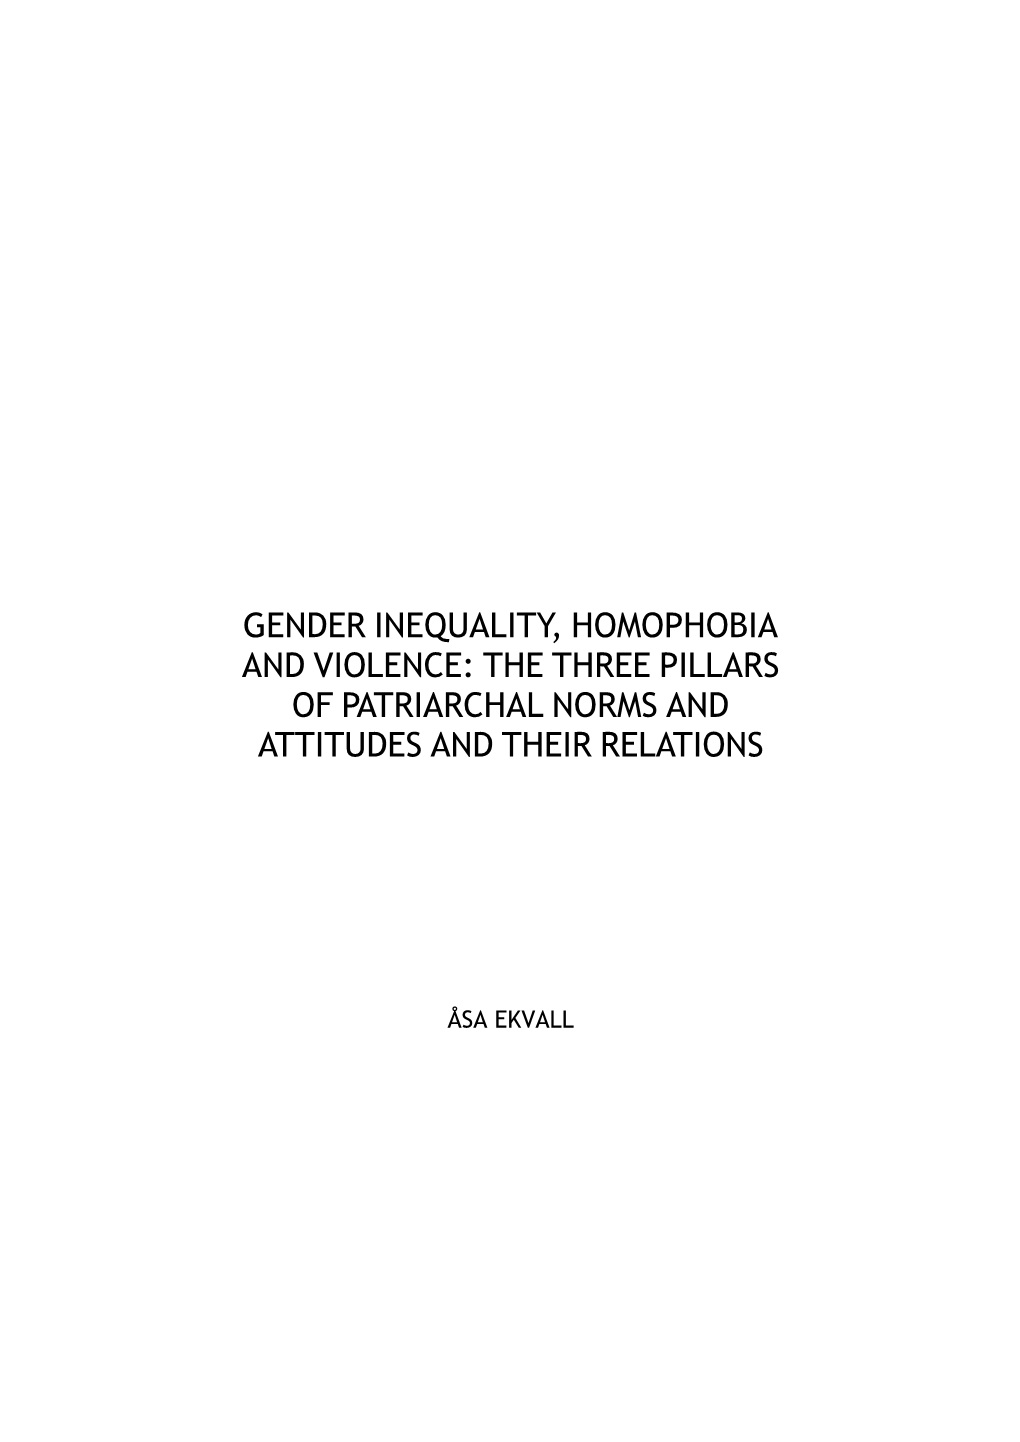 Gender Inequality, Homophobia and Violence: the Three Pillars of Patriarchal Norms and Attitudes and Their Relations